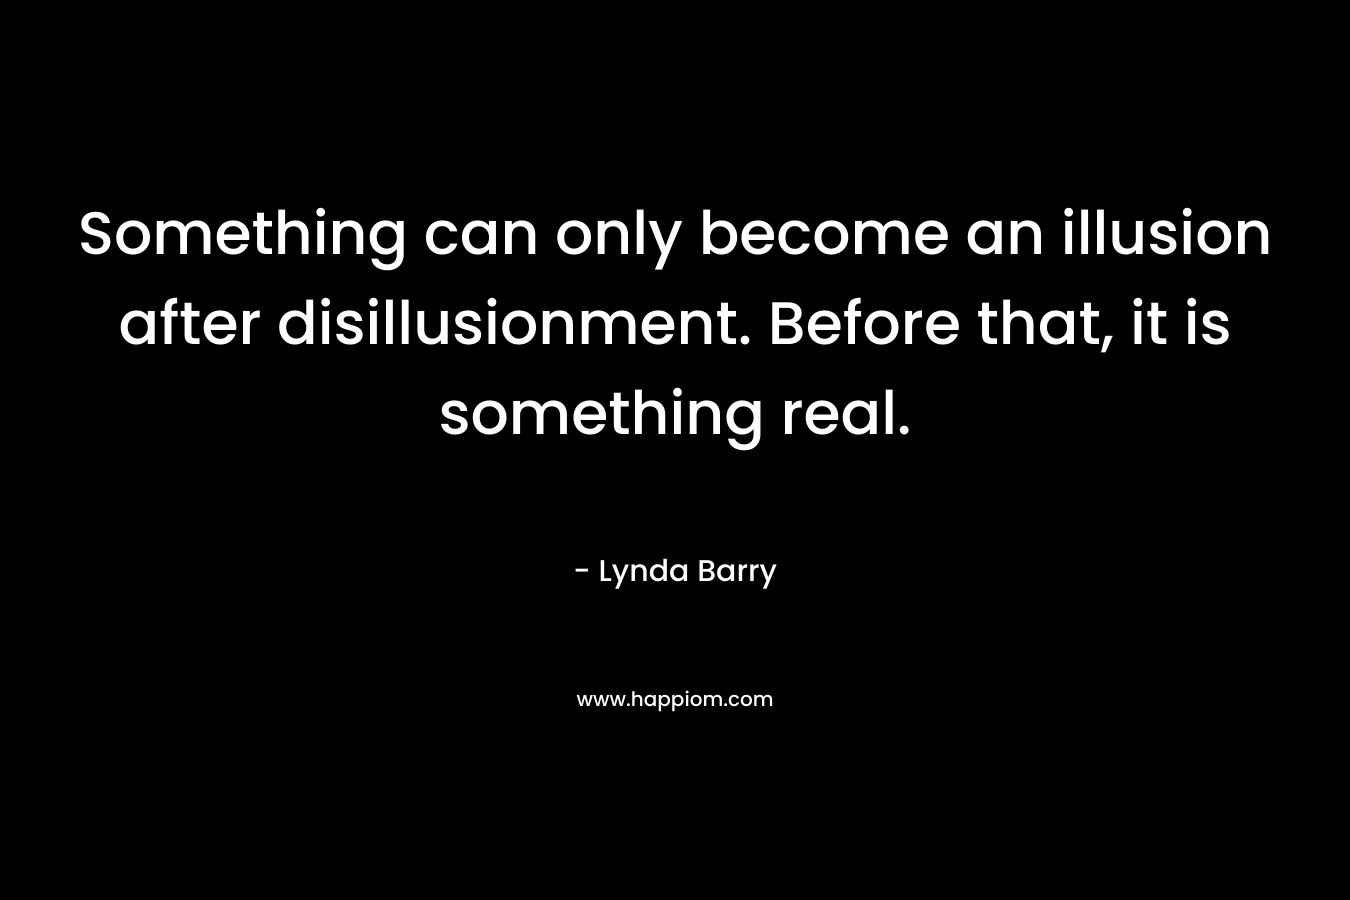 Something can only become an illusion after disillusionment. Before that, it is something real.